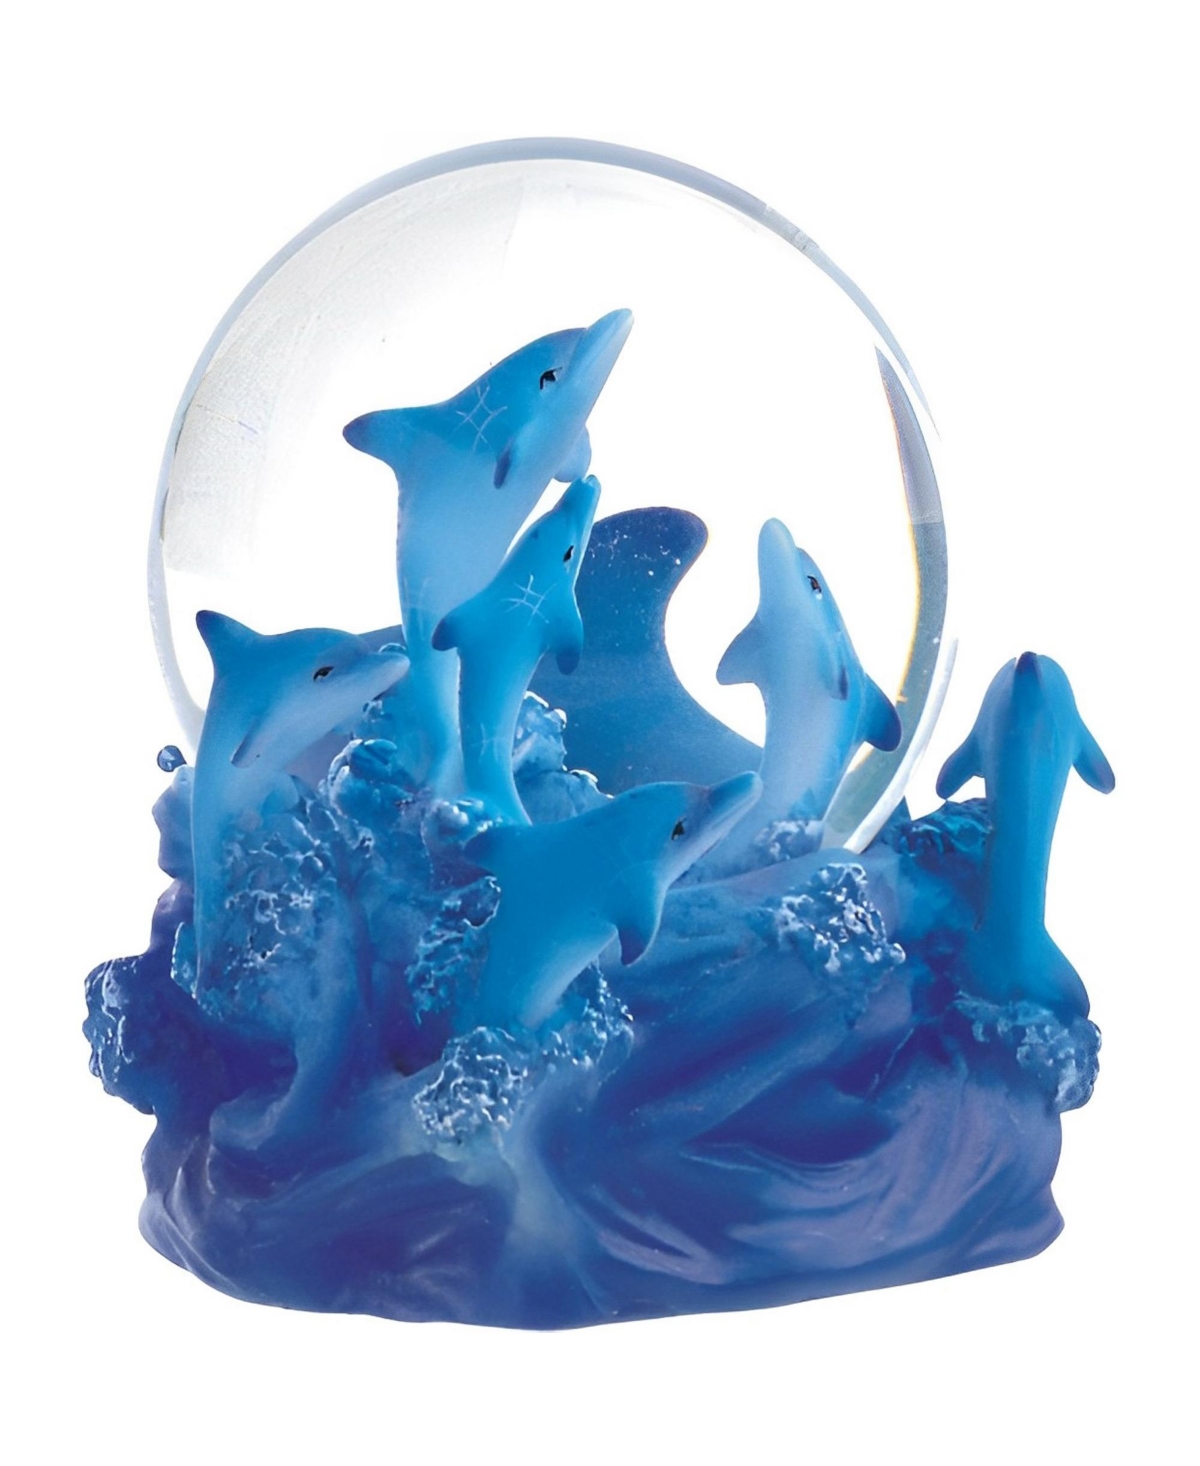 4"H Dolphin Glitter Snow Globe Figurine Home Decor Perfect Gift for House Warming, Holidays and Birthdays - Multicolor